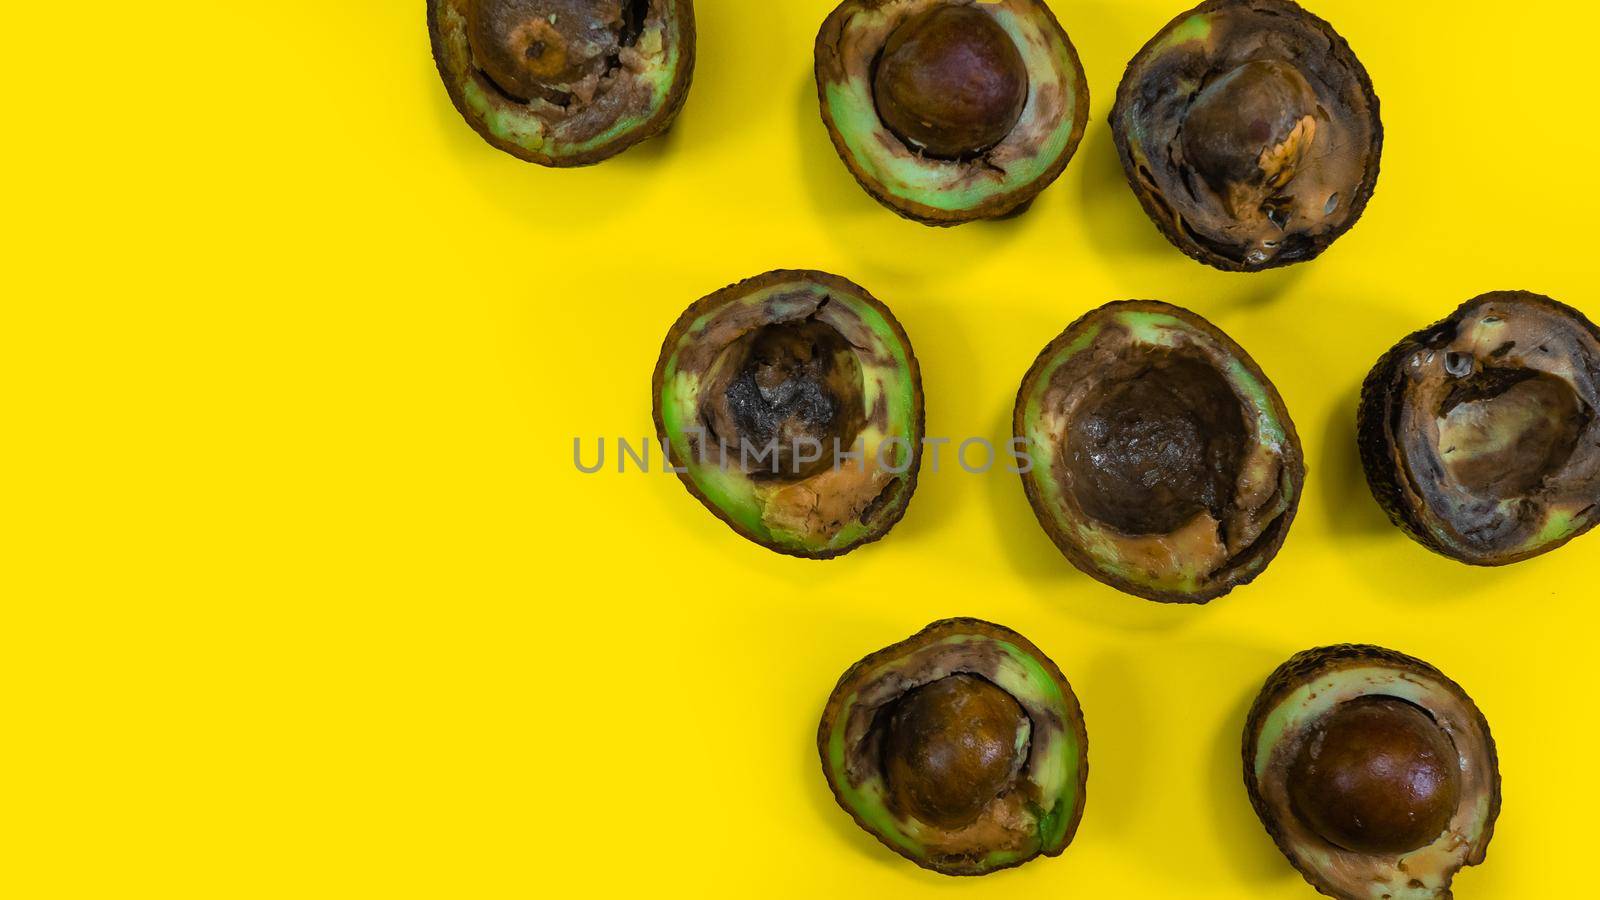 Ugly food on yellow background. Rotten tropical Avocado fruits. Concept of rotten fruit. Copy space on yellow background.